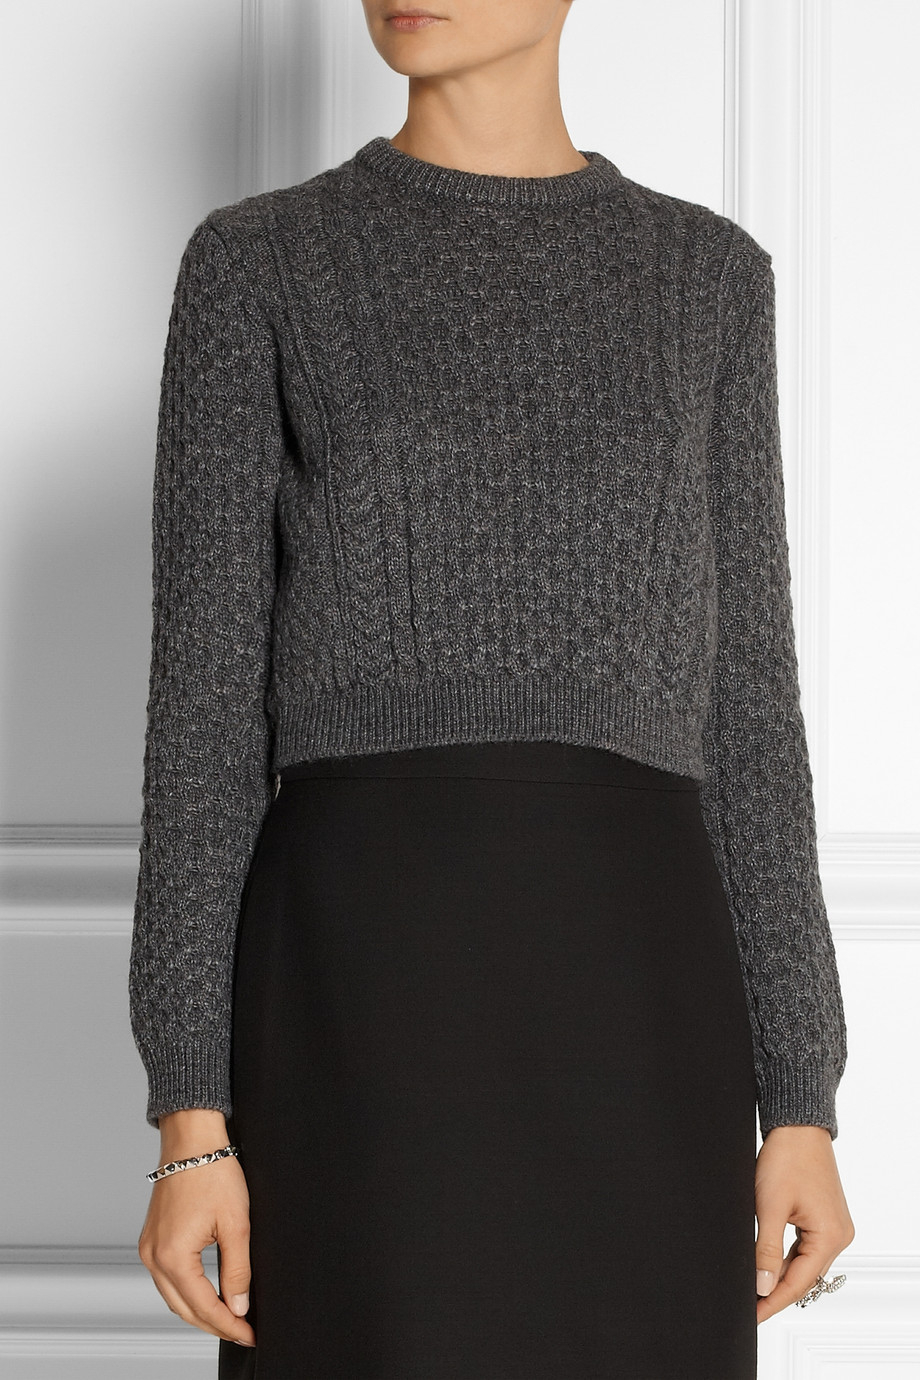 Lyst - Miu Miu Cropped Cable-Knit Sweater in Gray